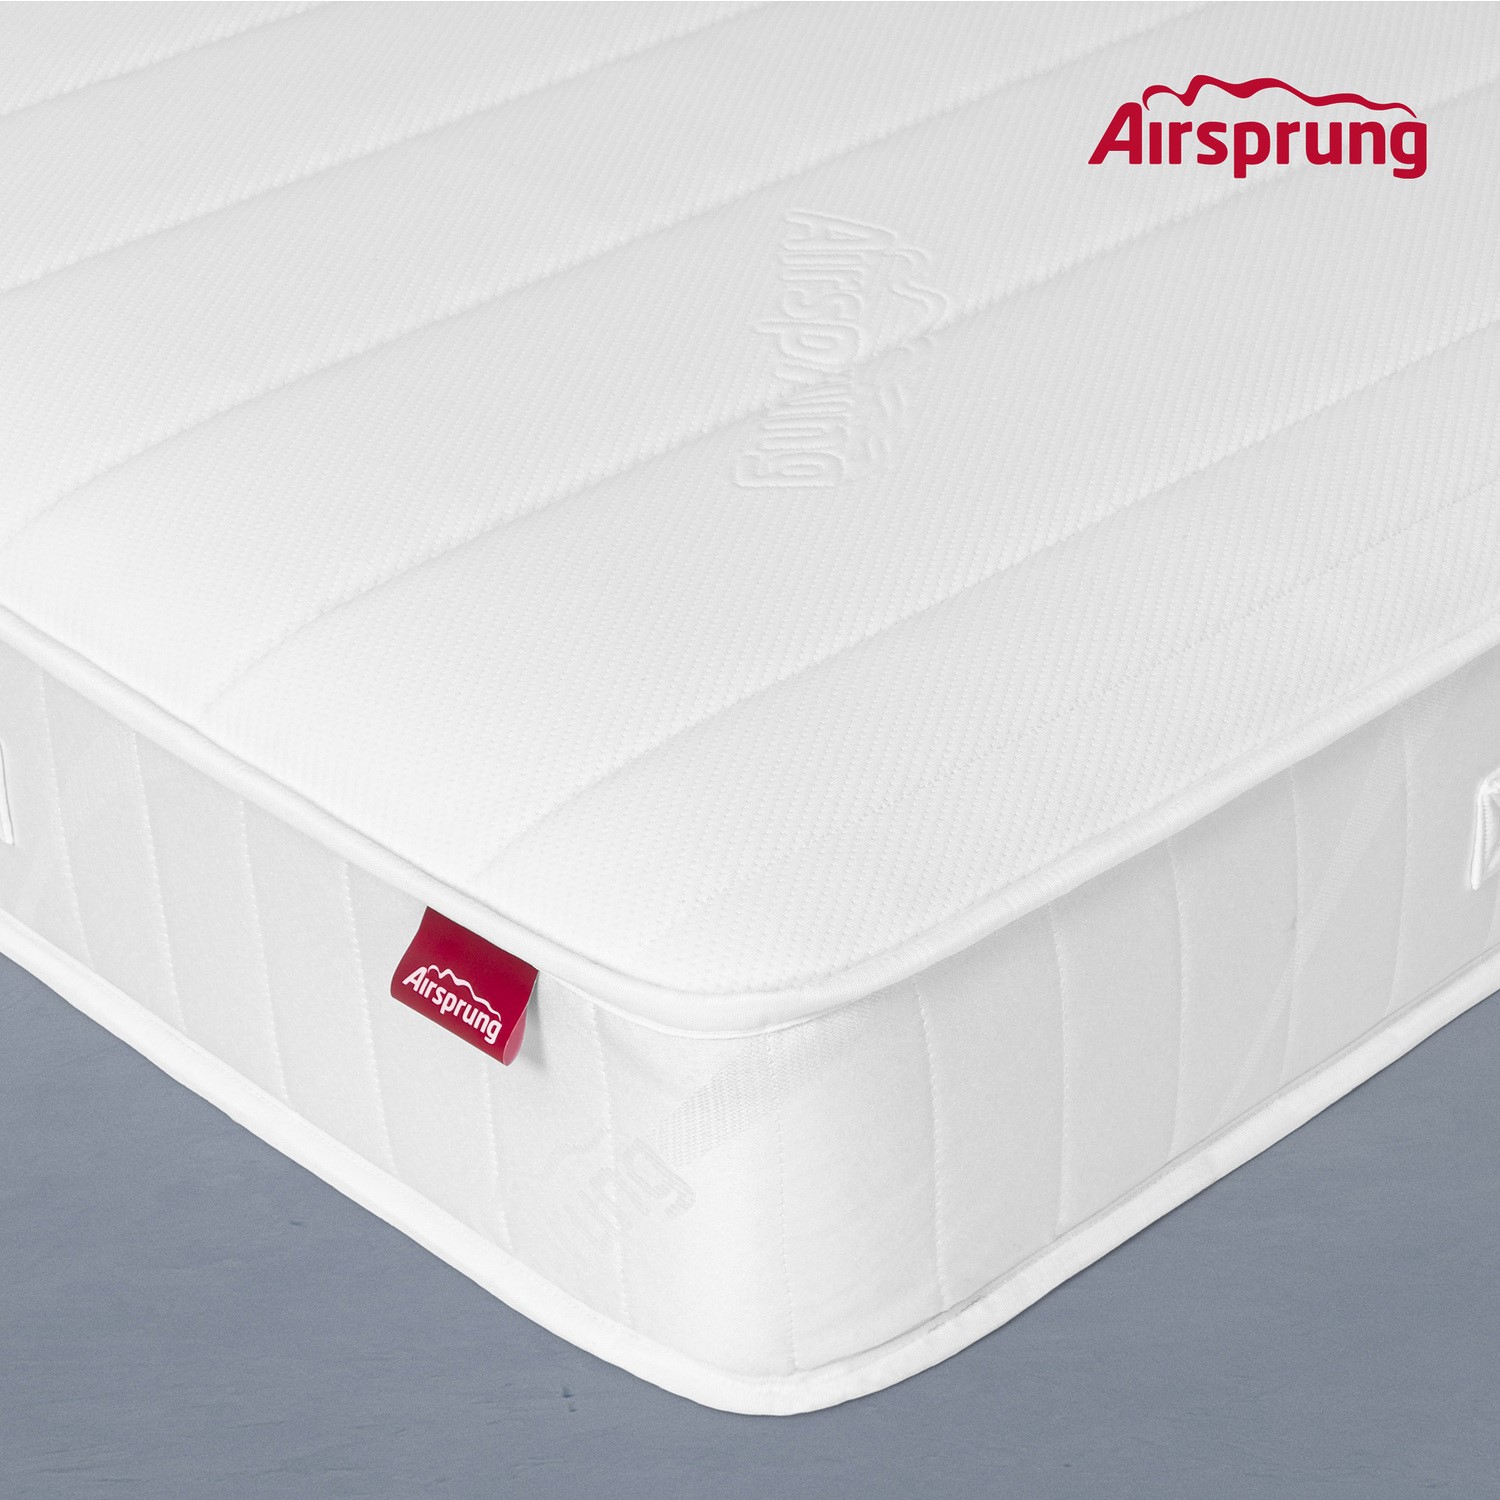 Airsprung hybrid rolled pocket sprung mattress - small double